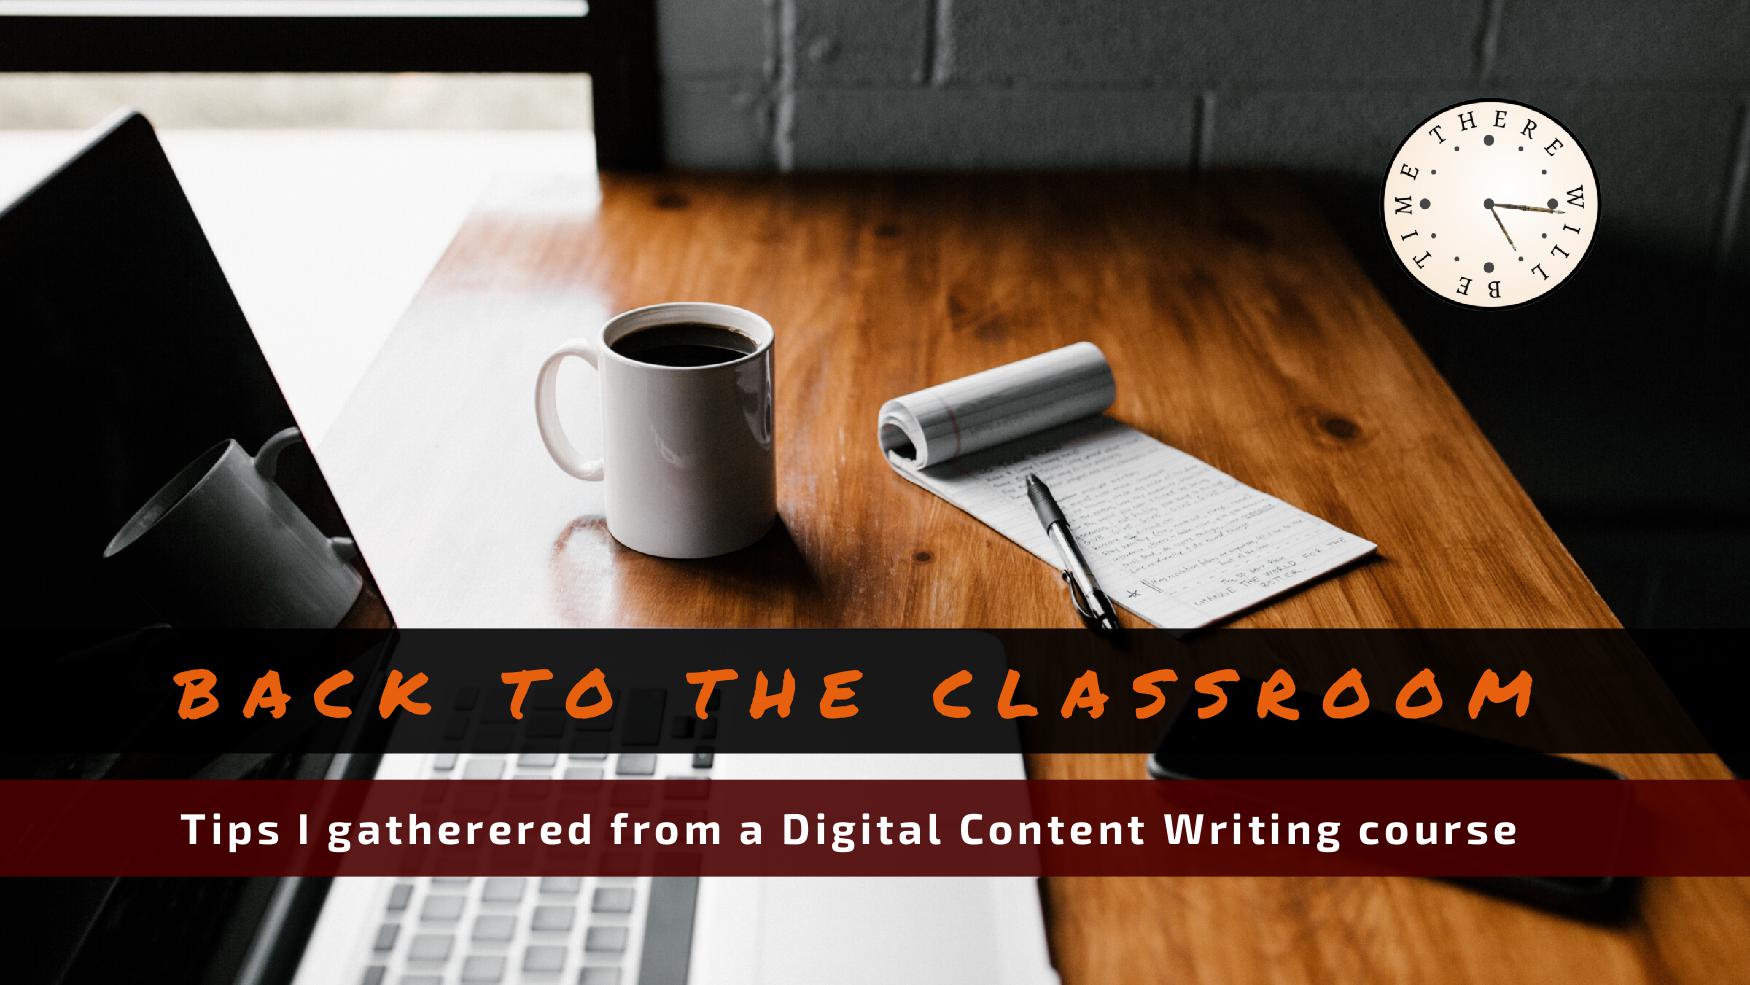 Header image for Digital Content Writing article